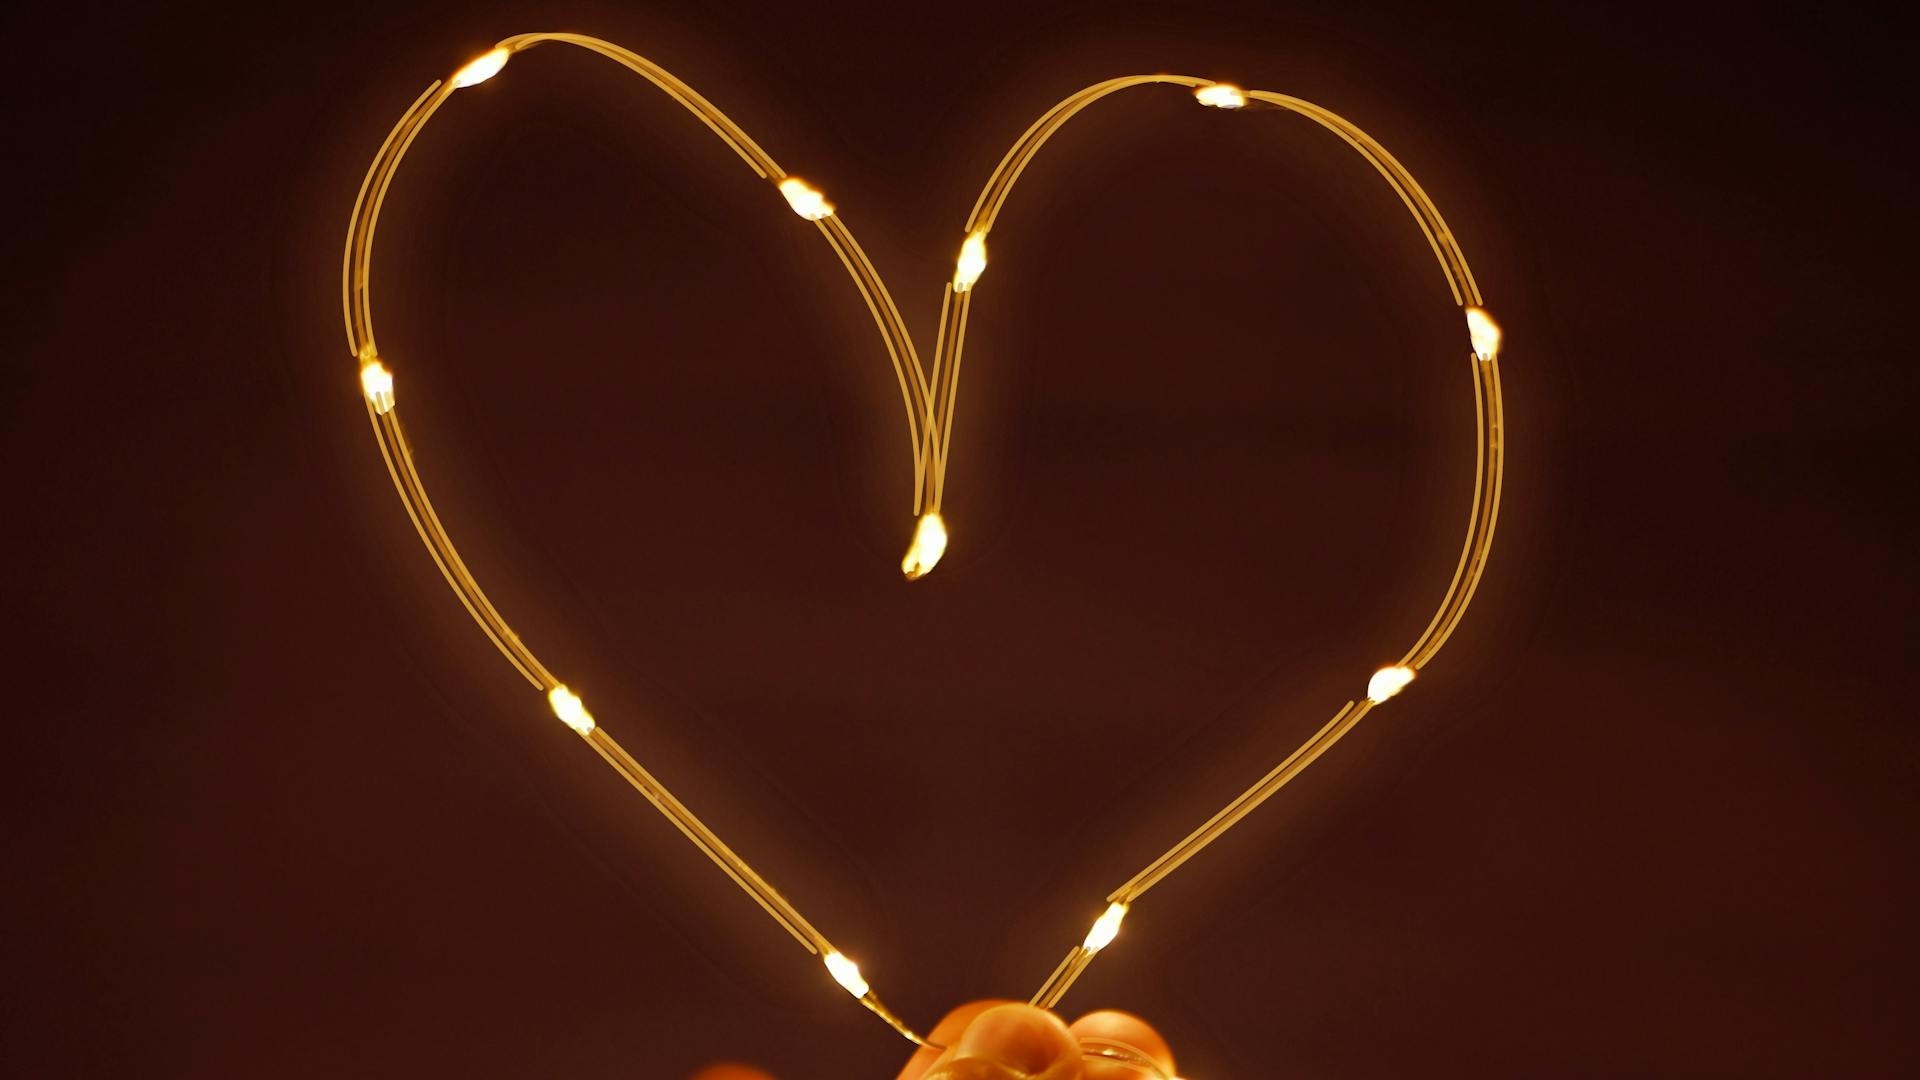 LED light string in the shape of a heart